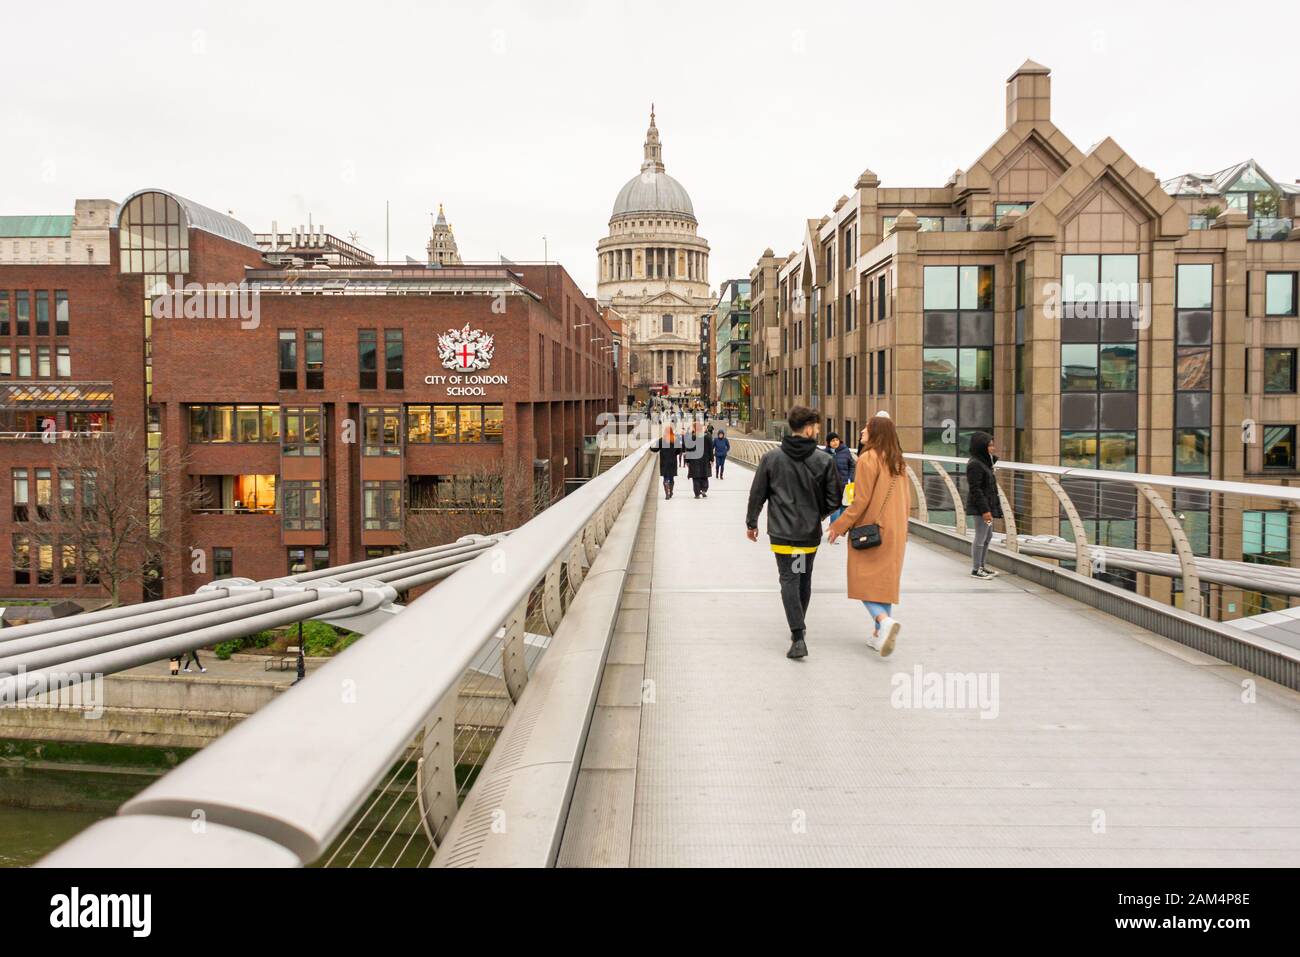 People on Millennium Bridge near City of London School and St Paul's Cathedral, London in winter Stock Photo